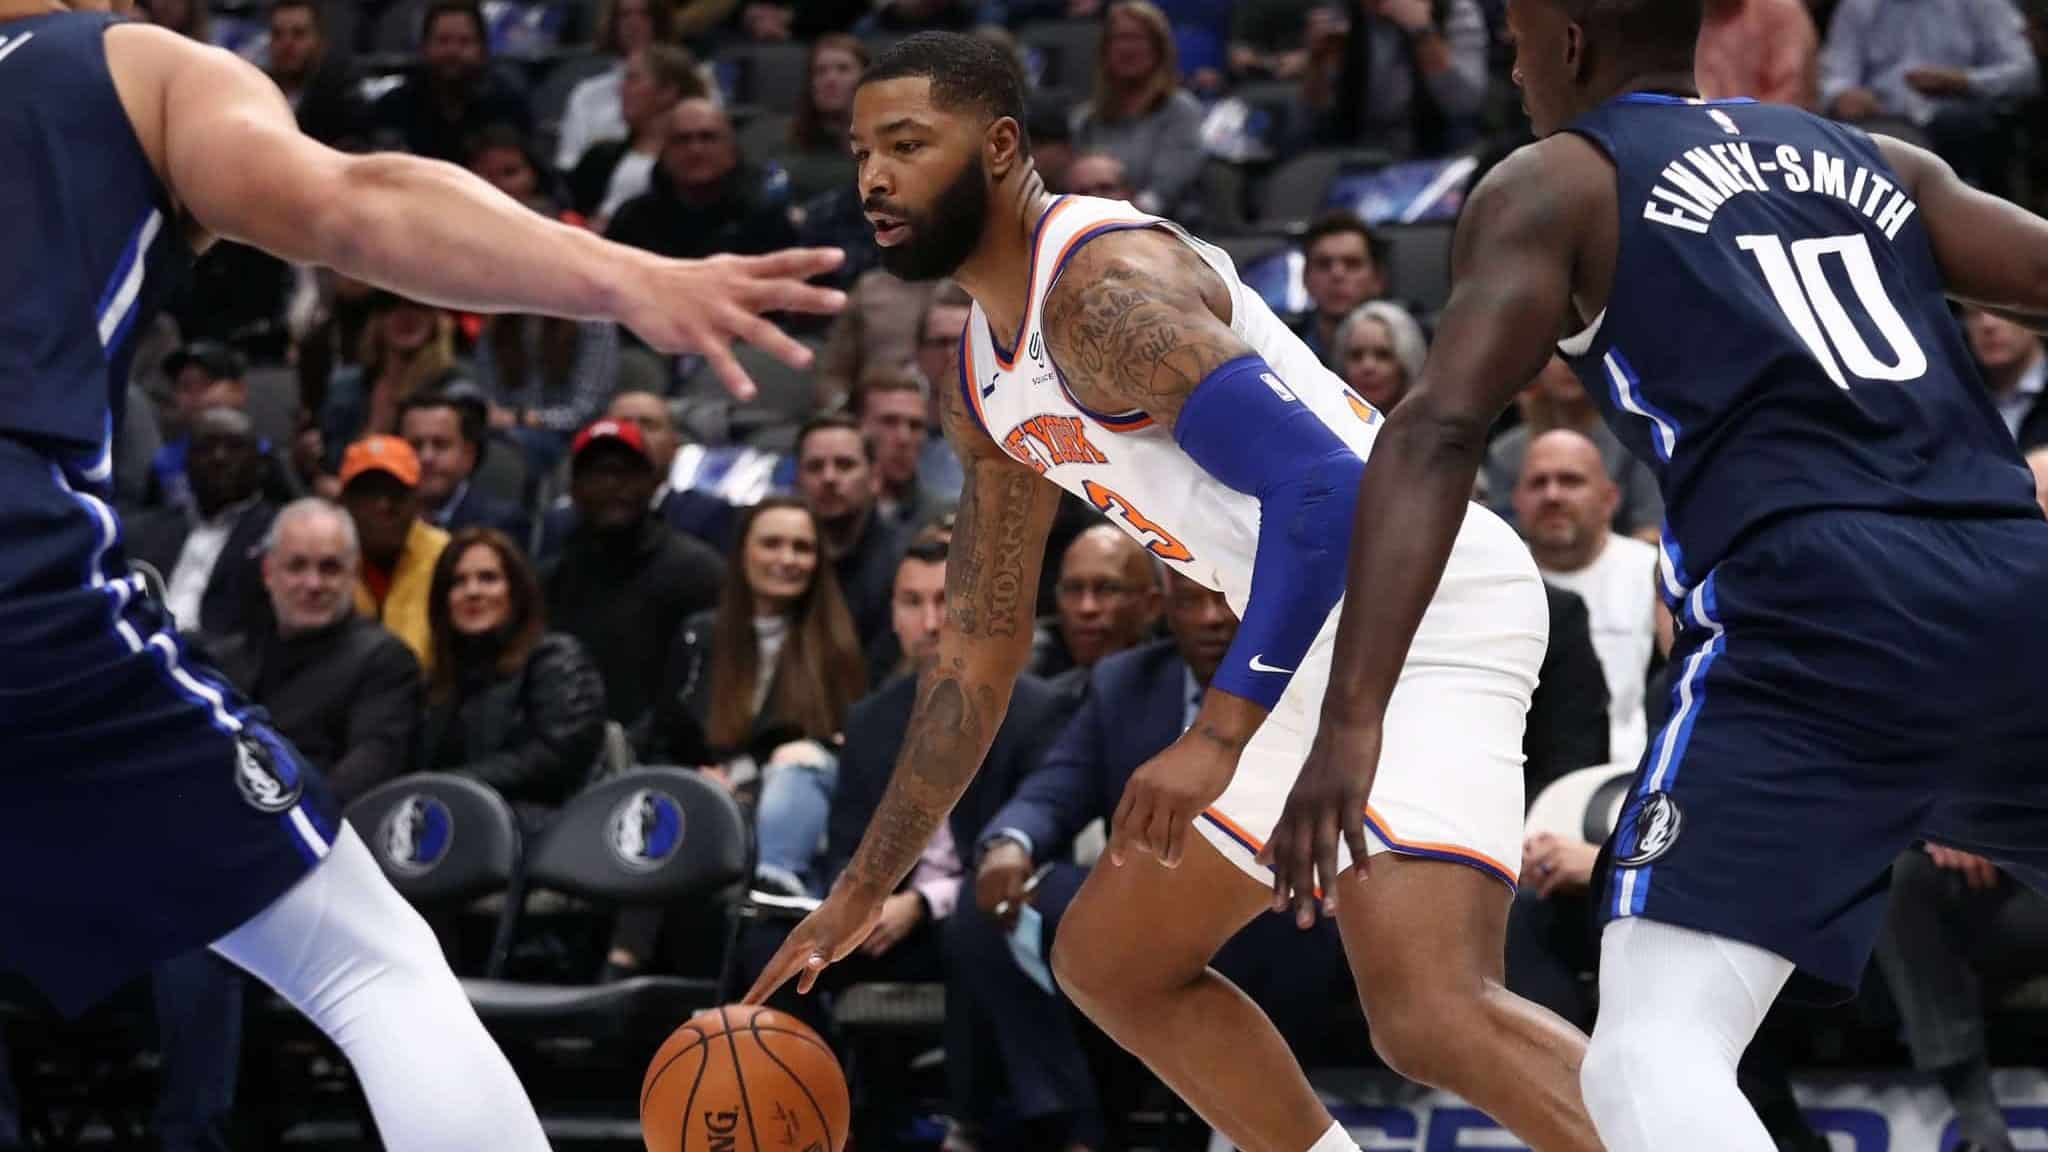 DALLAS, TEXAS - NOVEMBER 08: Marcus Morris Sr. #13 of the New York Knicks at American Airlines Center on November 08, 2019 in Dallas, Texas. NOTE TO USER: User expressly acknowledges and agrees that, by downloading and or using this photograph, User is consenting to the terms and conditions of the Getty Images License Agreement.